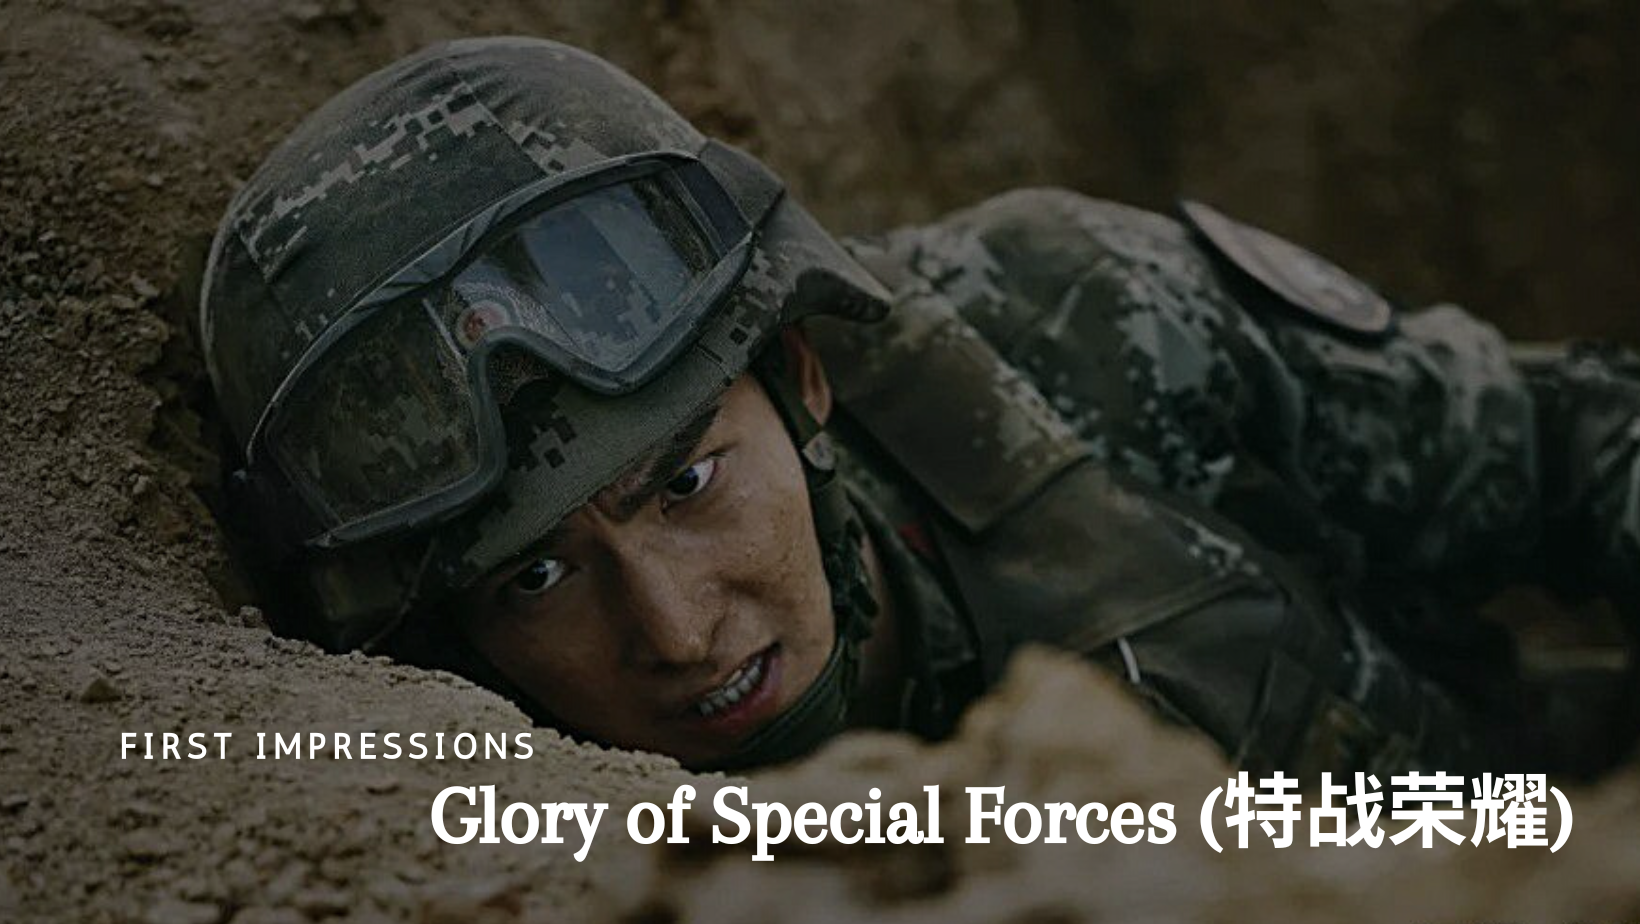 First Impressions: Glory of Special Forces (特战荣耀)